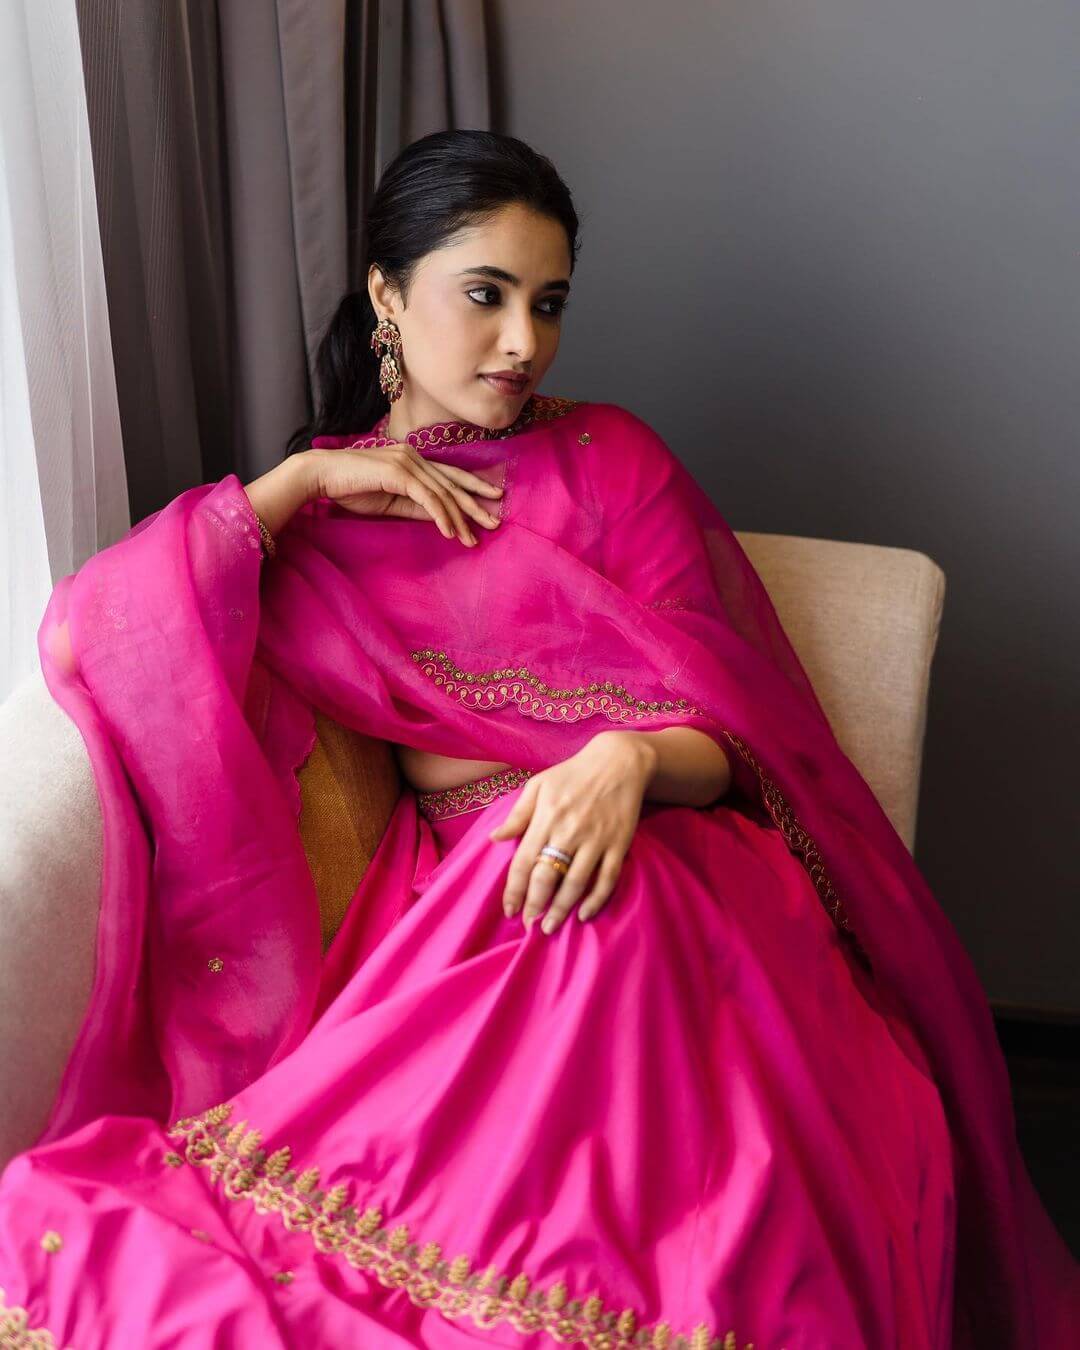 Priyanka Mohan In Hot Pink Lehenga Outfit Priyanka Arul Mohan Traditional Outfit Looks Collection